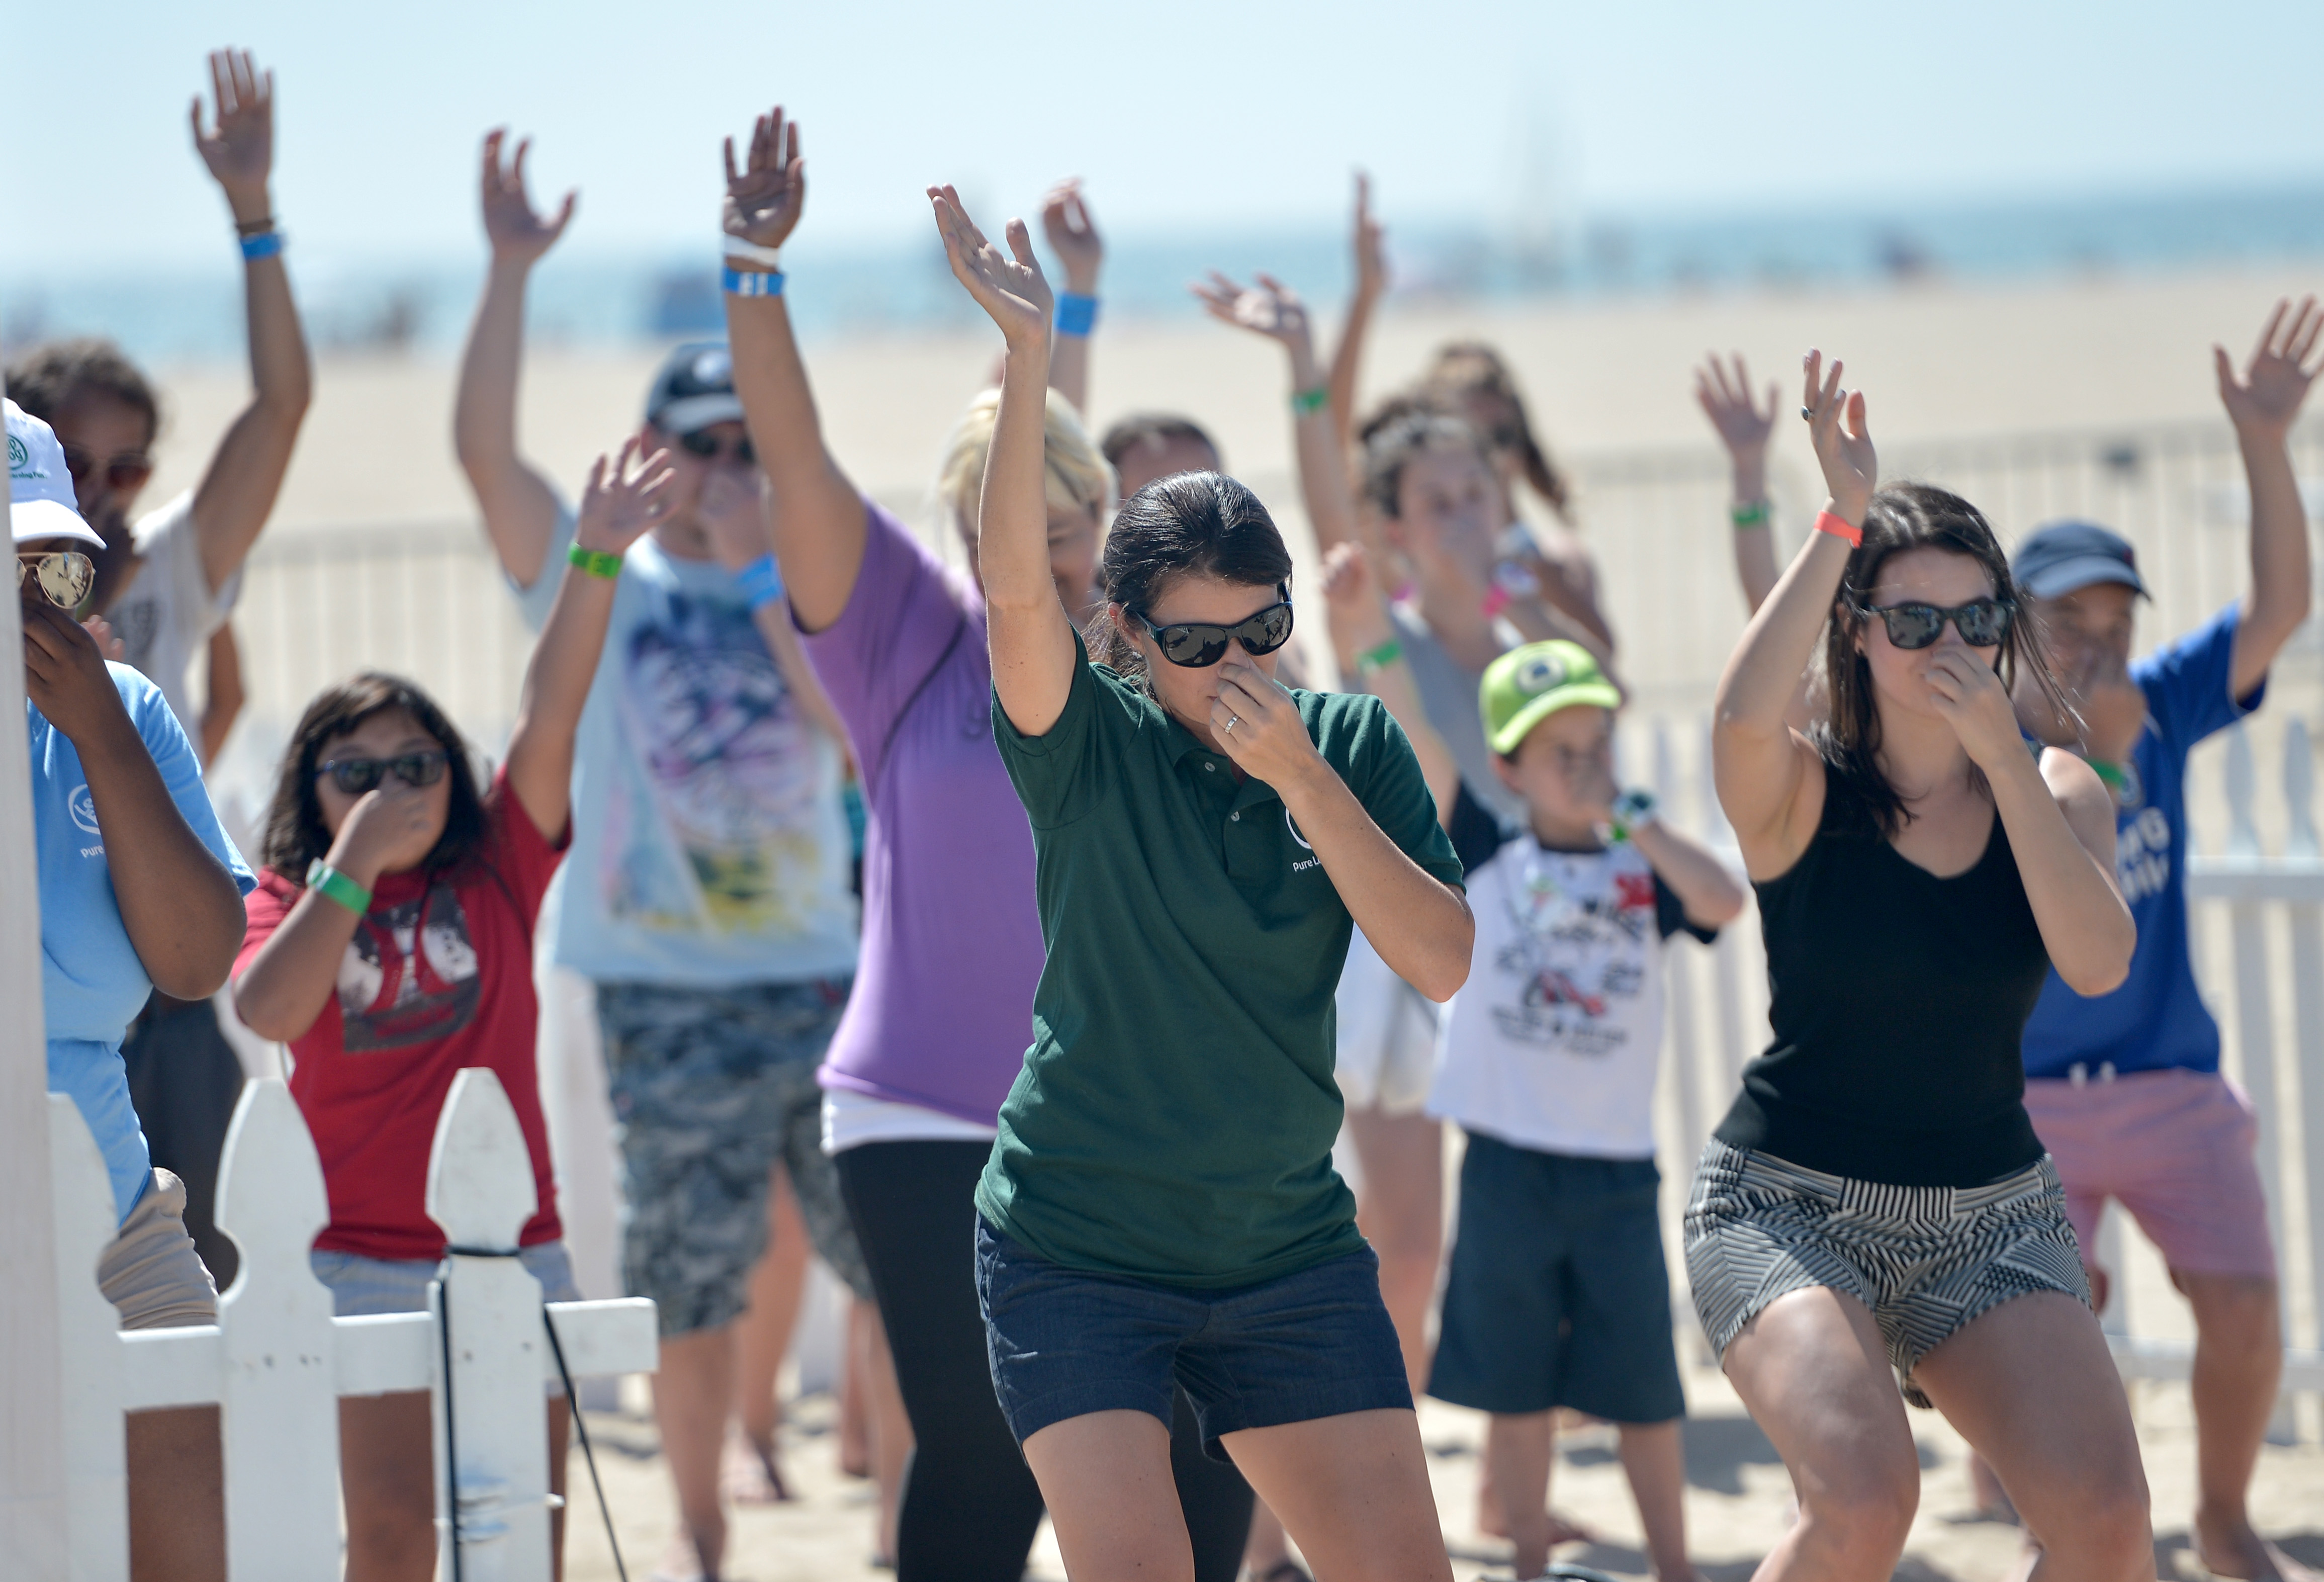 Soccer player Mia Hamm (C) and LeapFrog attempt to become GUINNESS WORLD RECORDS record holders in celebration of the launch of the new LeapBand Activity Tracker For Kids at the first-ever Fit Made Fun Day at Santa Monica Pier on September 6, 2014 in Santa Monica, California. (Photo by Charley Gallay/Getty Images for LeapFrog) (Charley Gallay—Getty Images for LeapFrog)